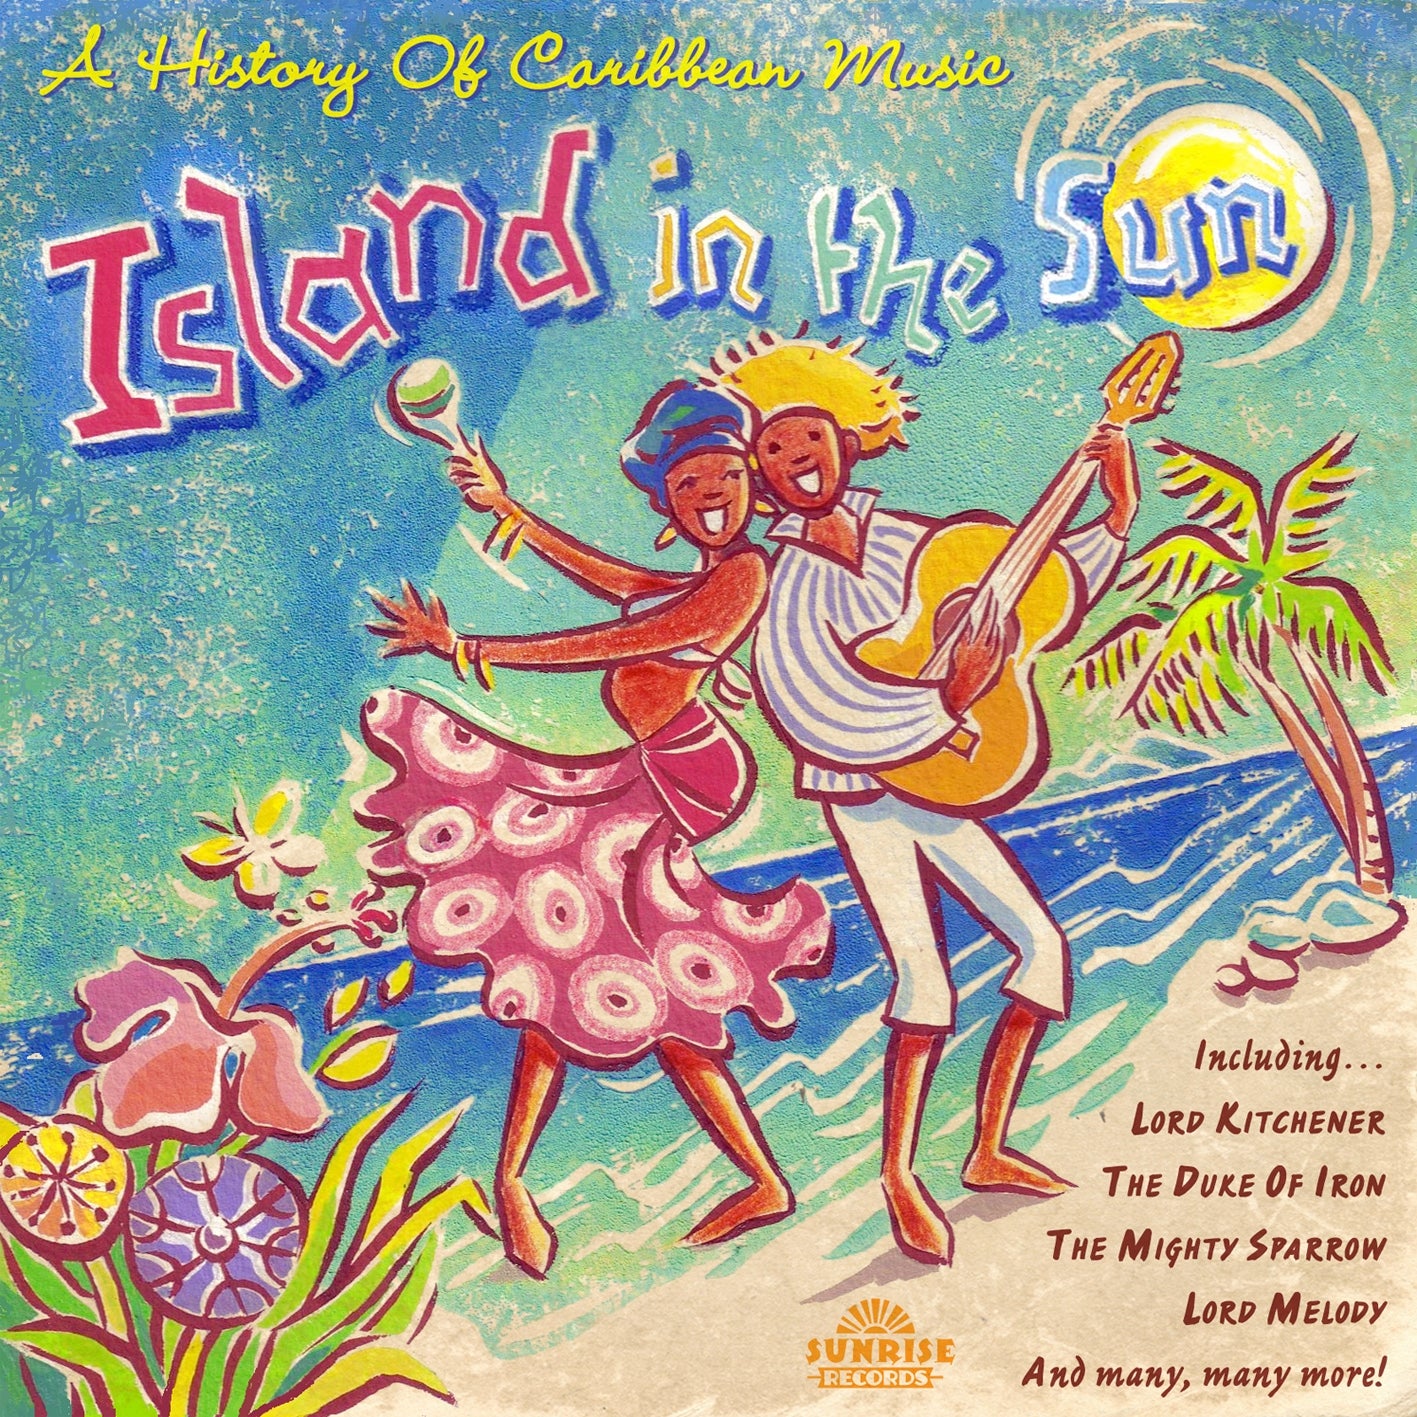 In　The　Limited　Sun:　Records　A　Secret　History　Of　Caribbean　Music　2CD　–　Various　Island